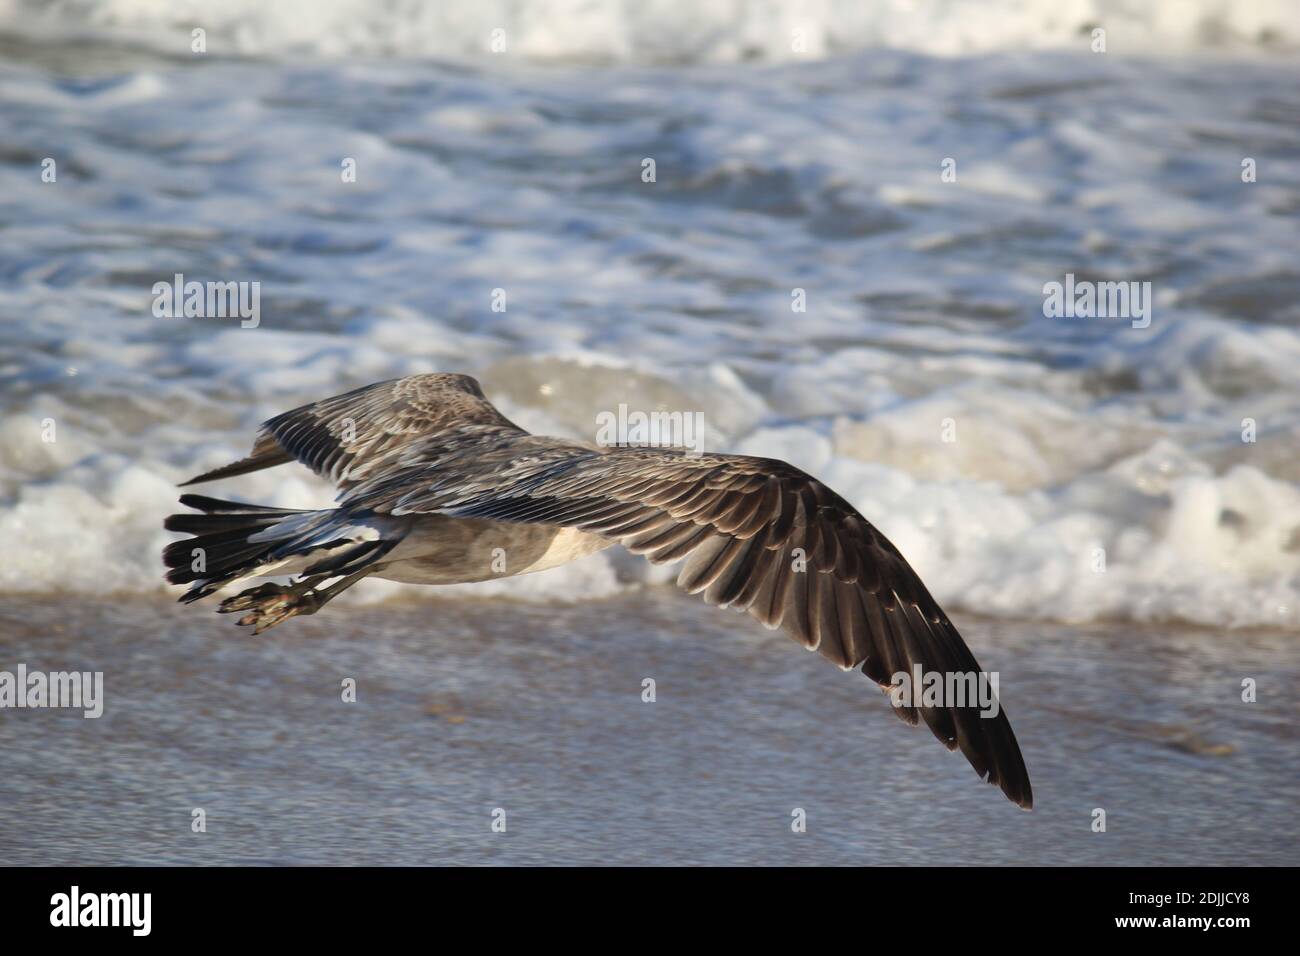 Pacific Seagull Number 4 Fying Over The Sea Stock Photo